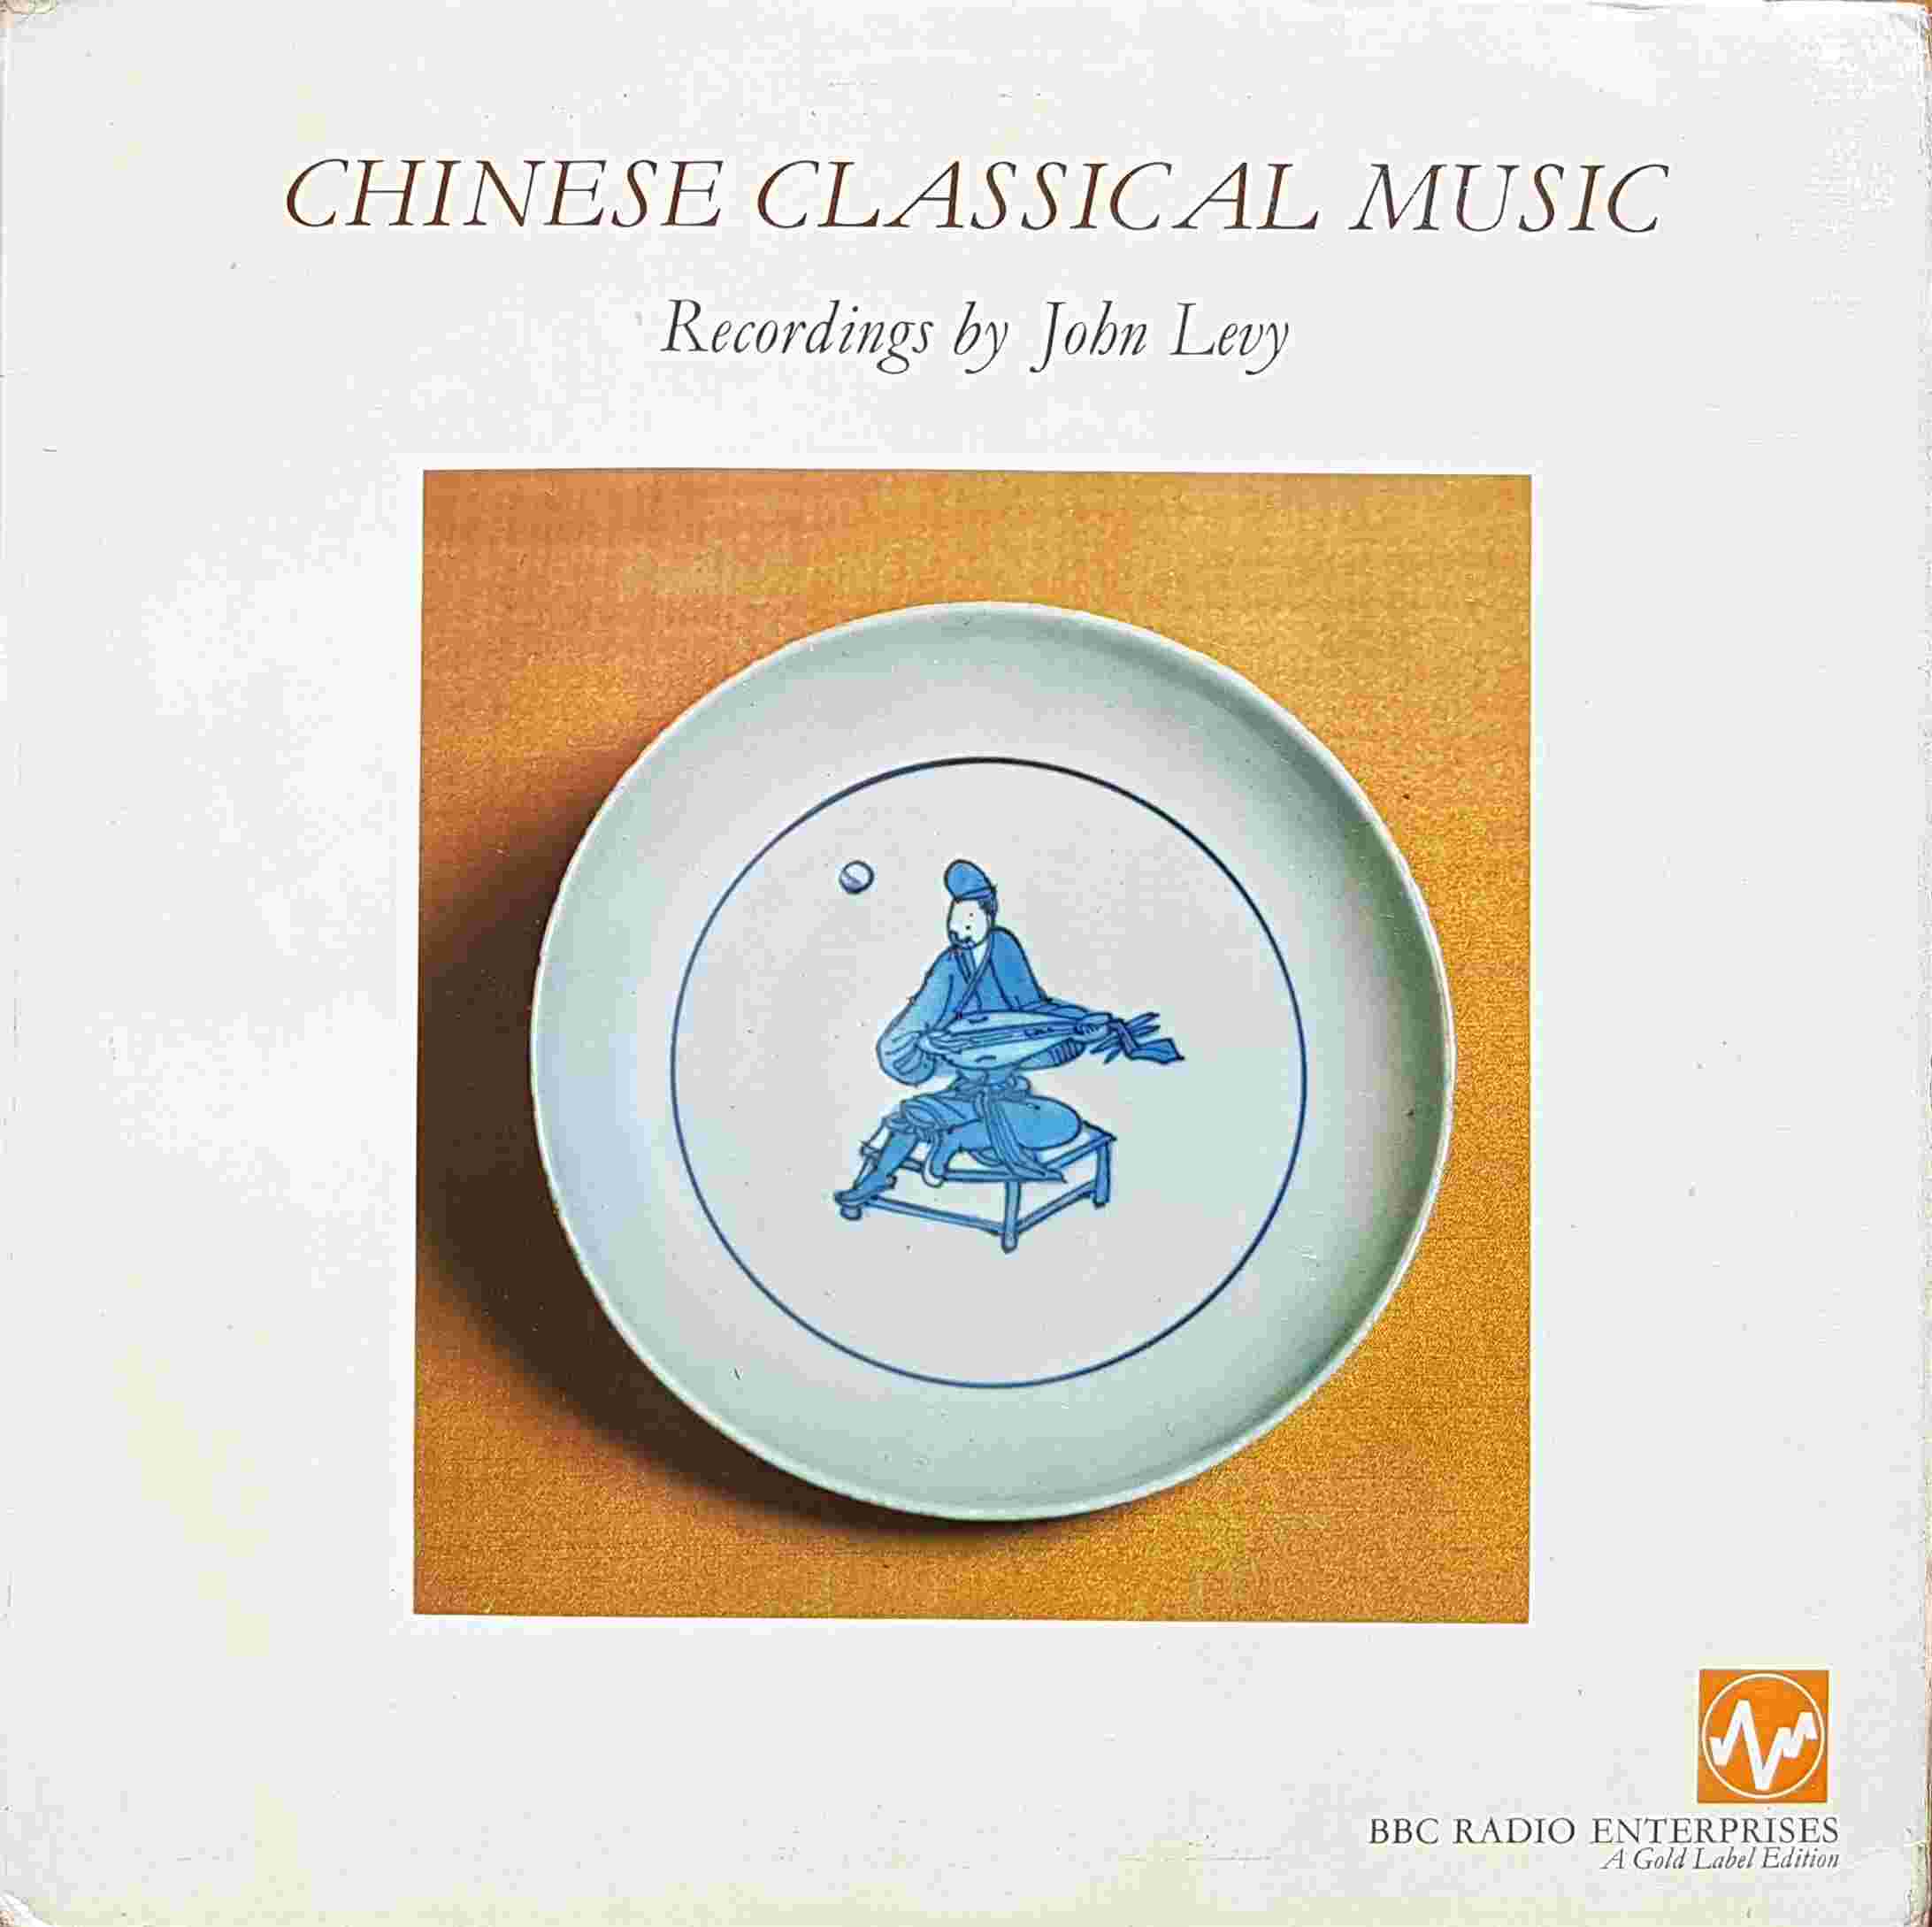 Picture of REGL 1 Chinese classical music (Includes booklet) by artist Various from the BBC albums - Records and Tapes library